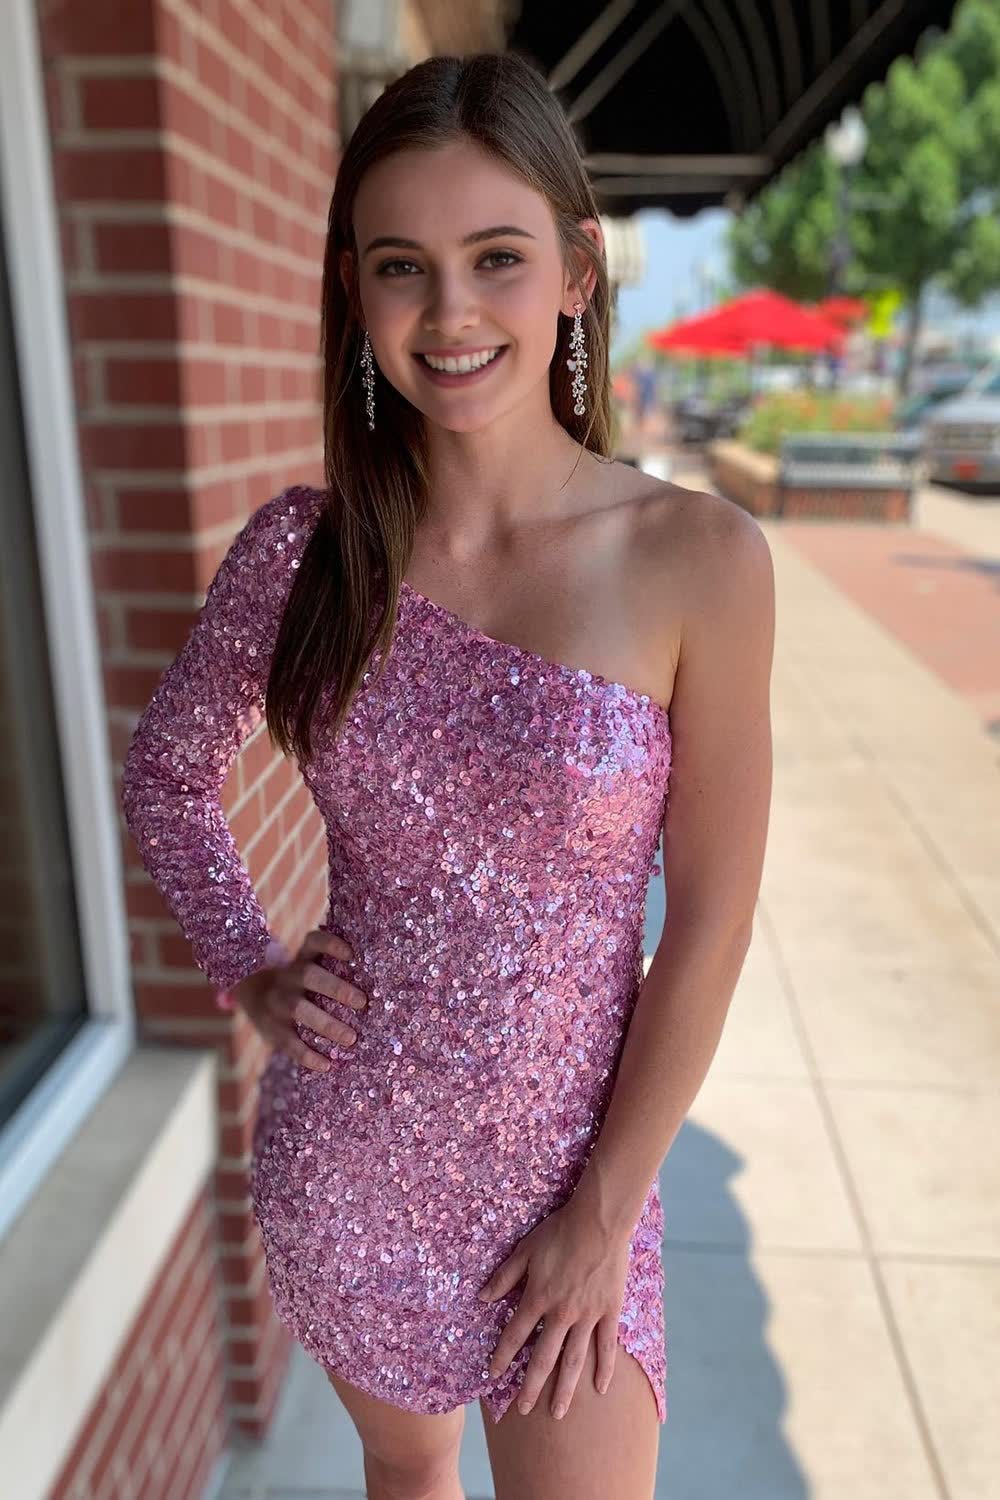 Pink One Shoulder One Sleeve Sequins Tight Short Corset Homecoming Dress outfit, Pink One Shoulder One Sleeve Sequins Tight Short Homecoming Dress